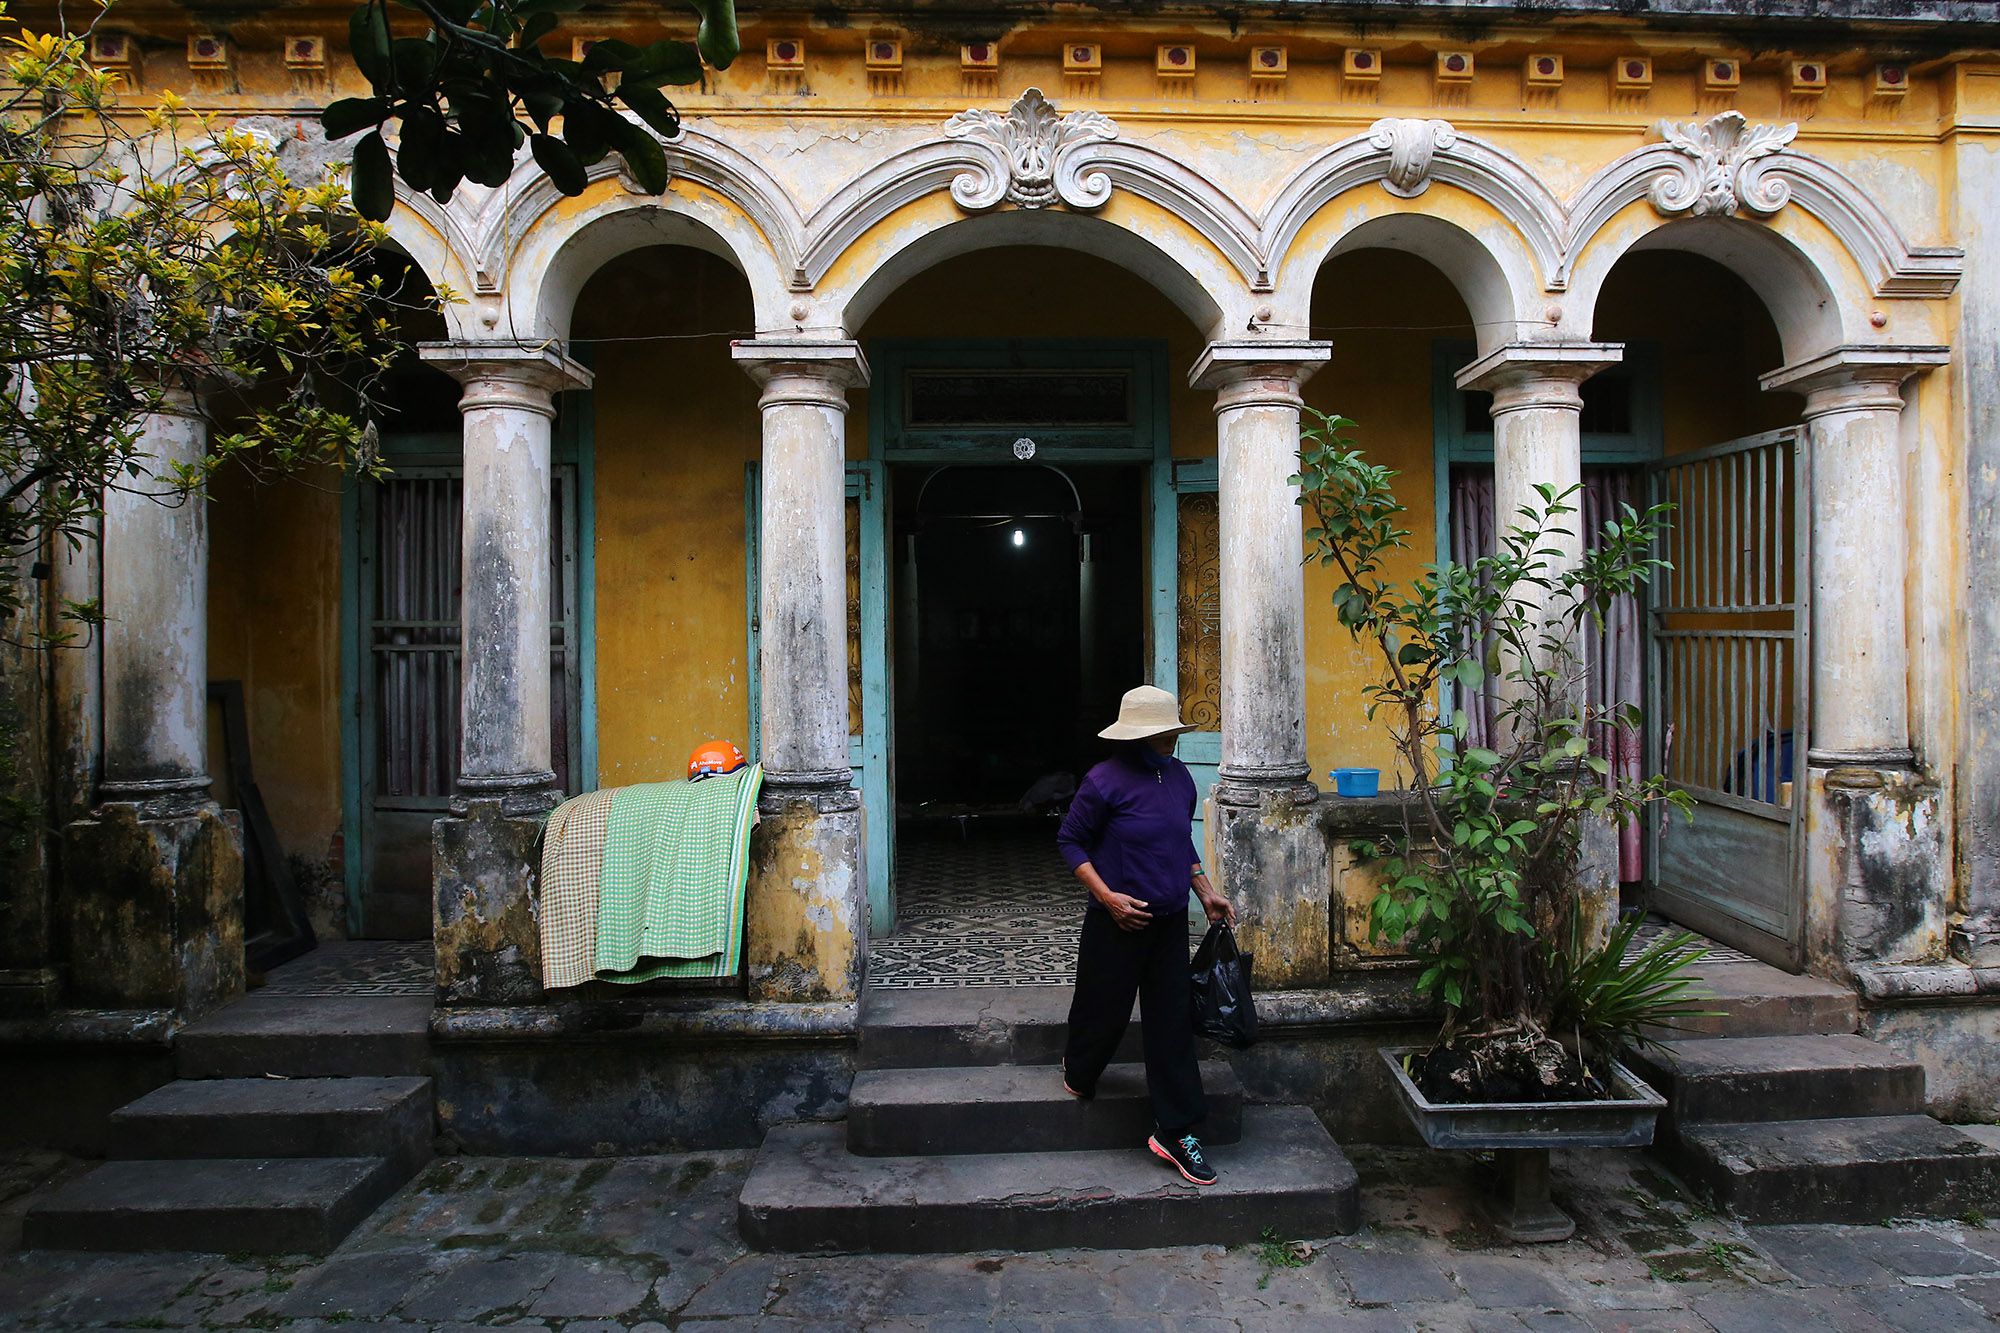 Dong Ngac, one of Hanoi’s oldest villages